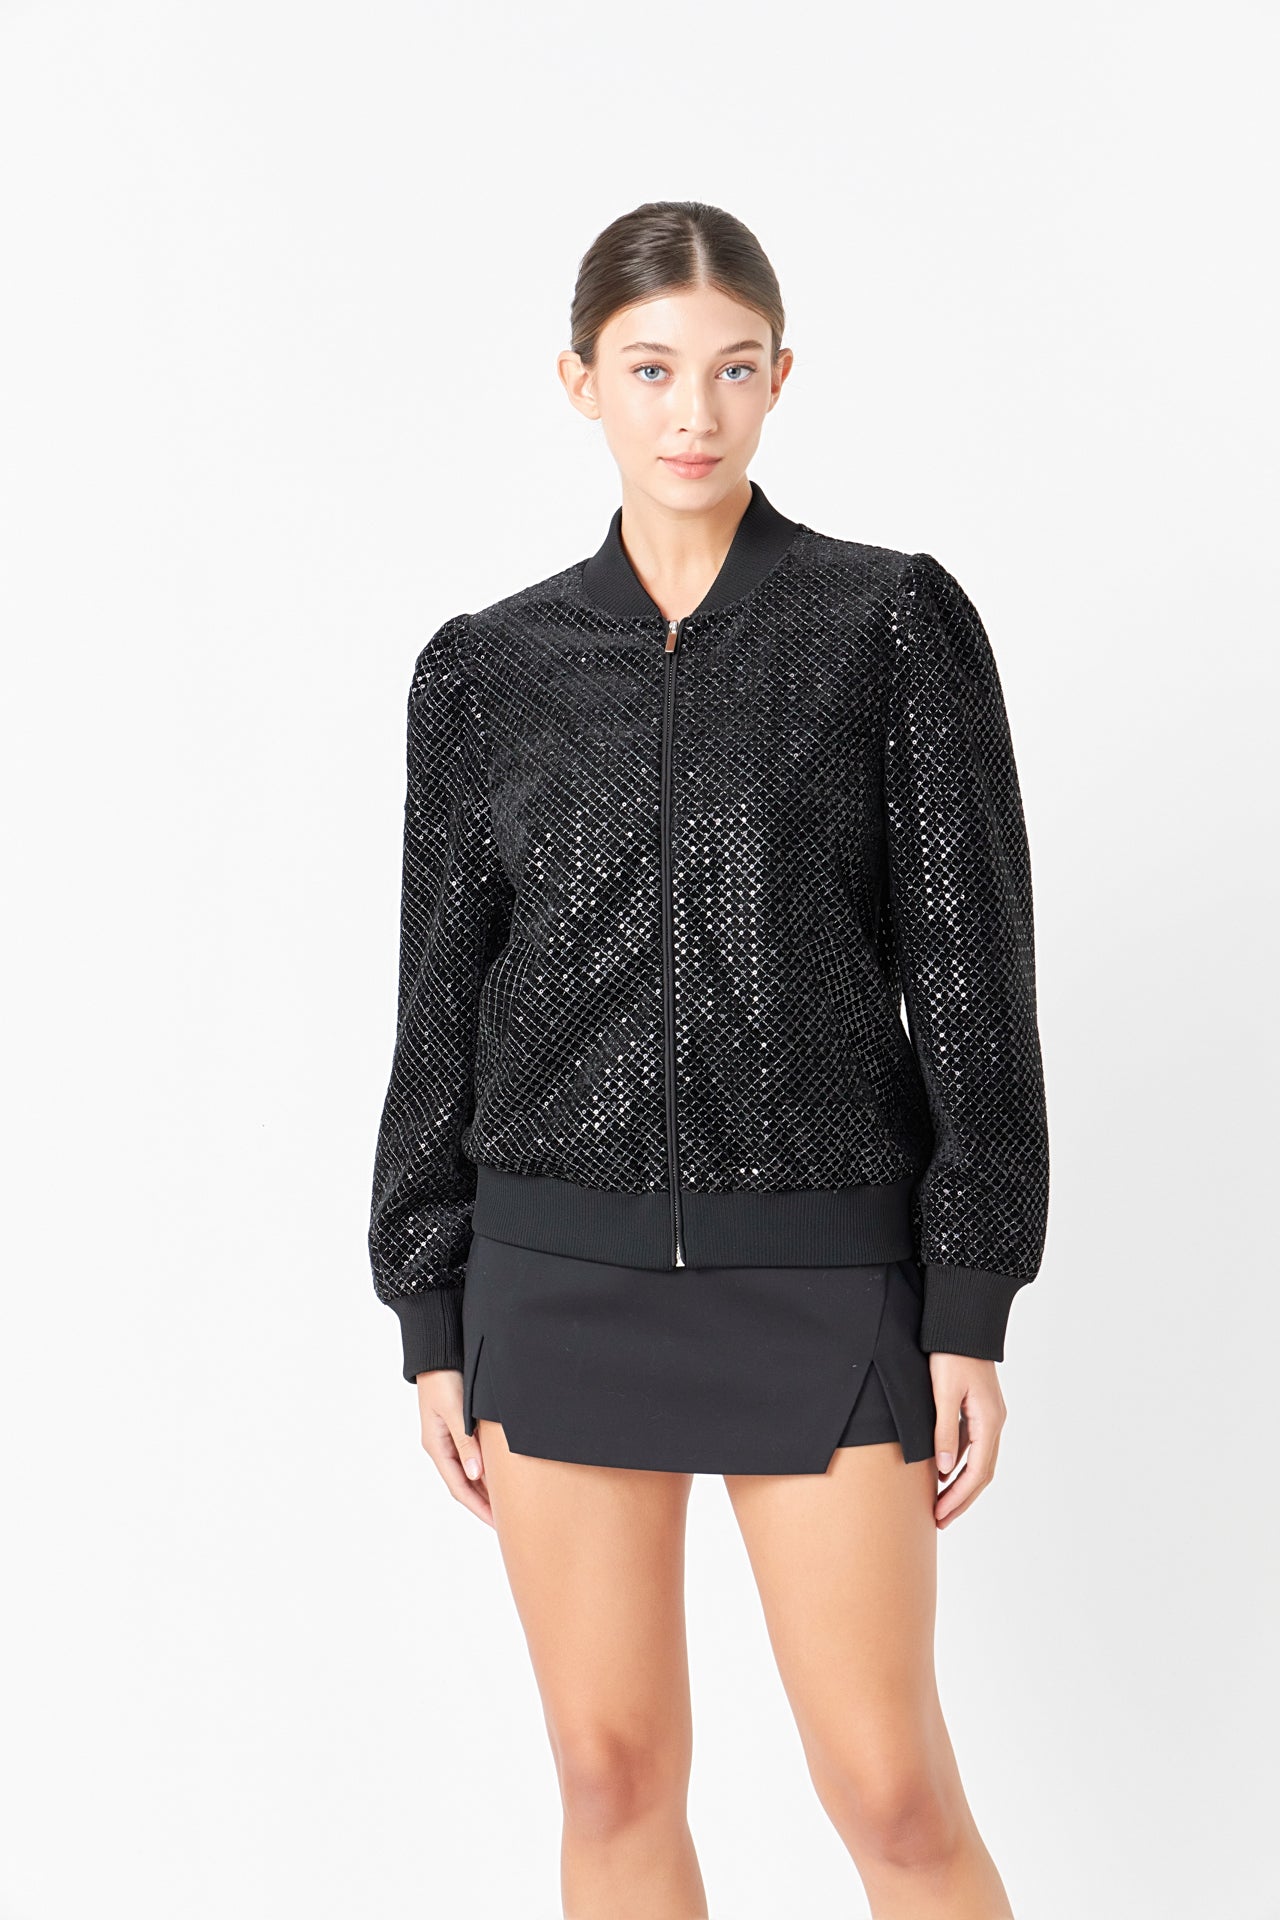 ENDLESS ROSE - Velvet Sequin Bomber Jacket - JACKETS available at Objectrare